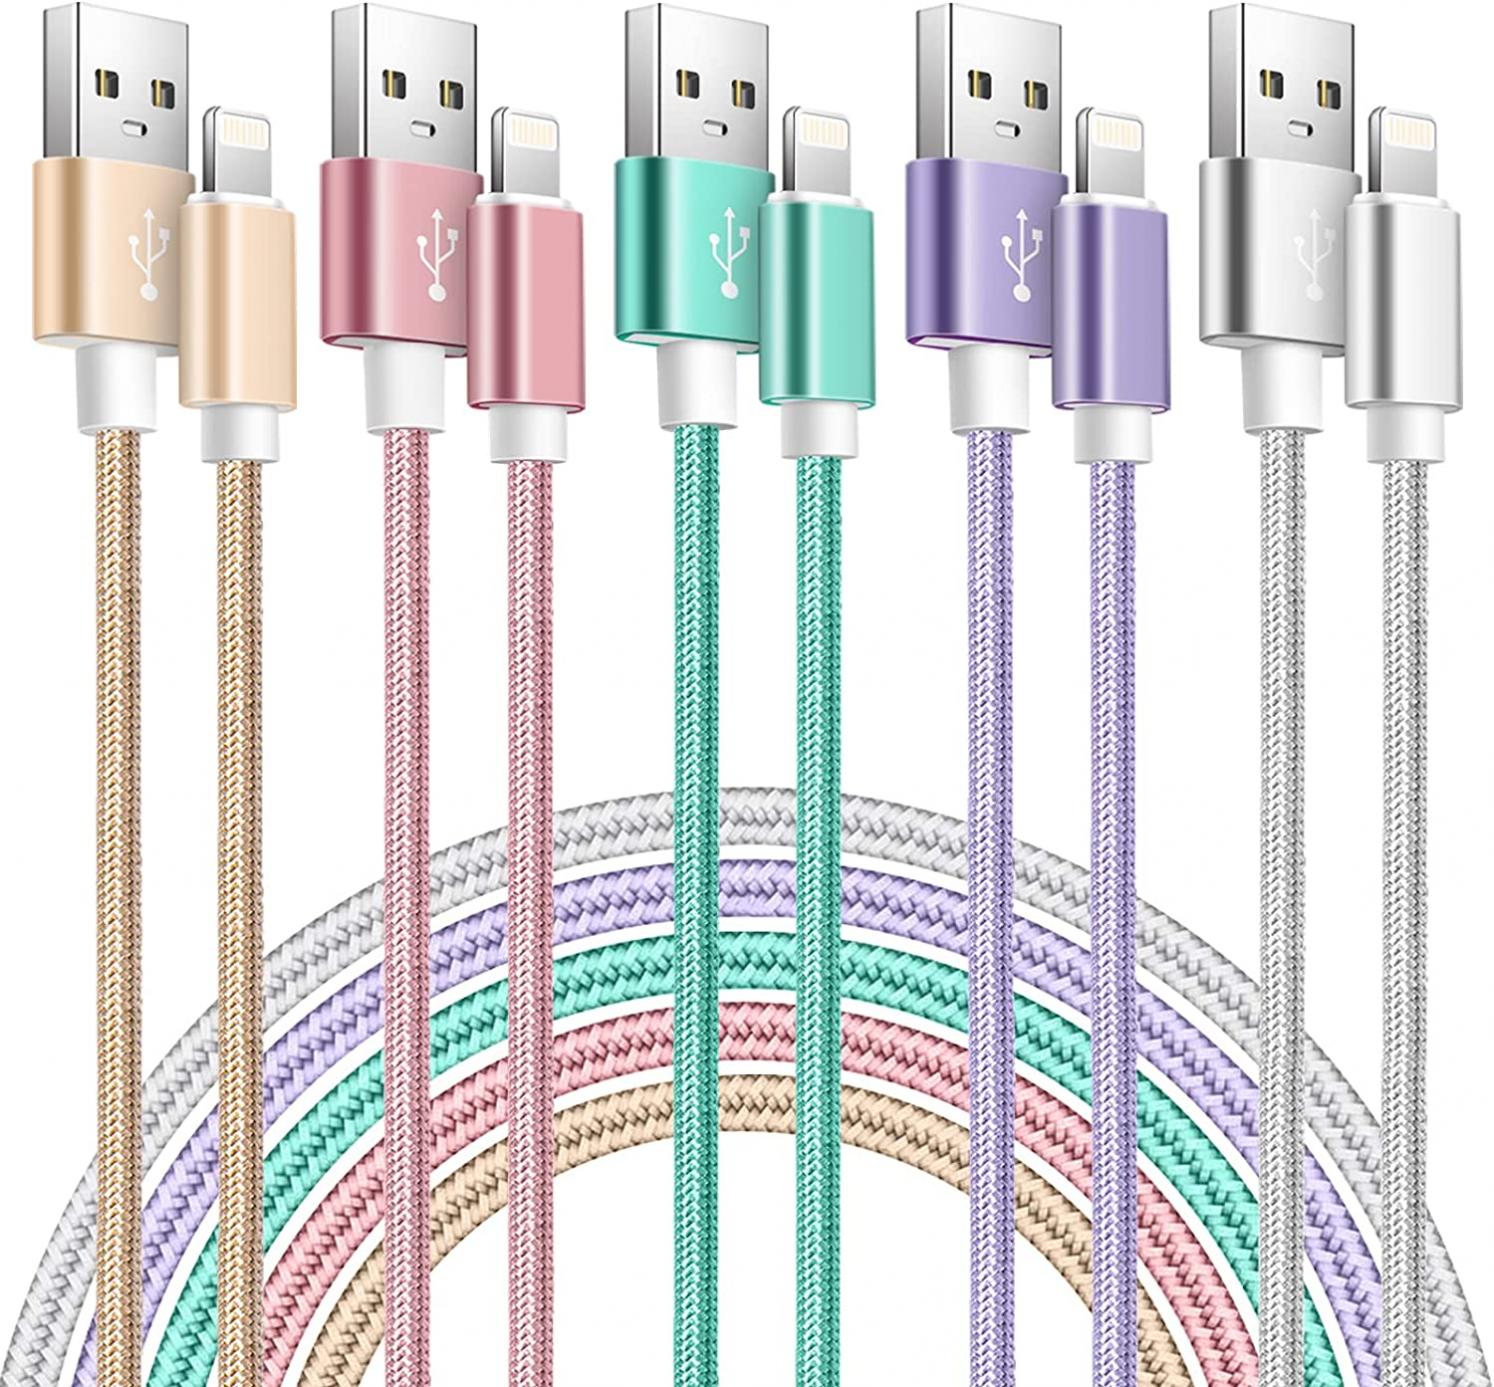 [Apple MFi Certified] iPhone Charger - 5Pack 3/3/6/6/10 FT iPhone Fast Charging Cord iPhone Lightning Cable Nylon Braided Long USB Cord Compatible with iPhone 13 Pro/13/12/11/XS MAX/XR/8/7/6s/iPad